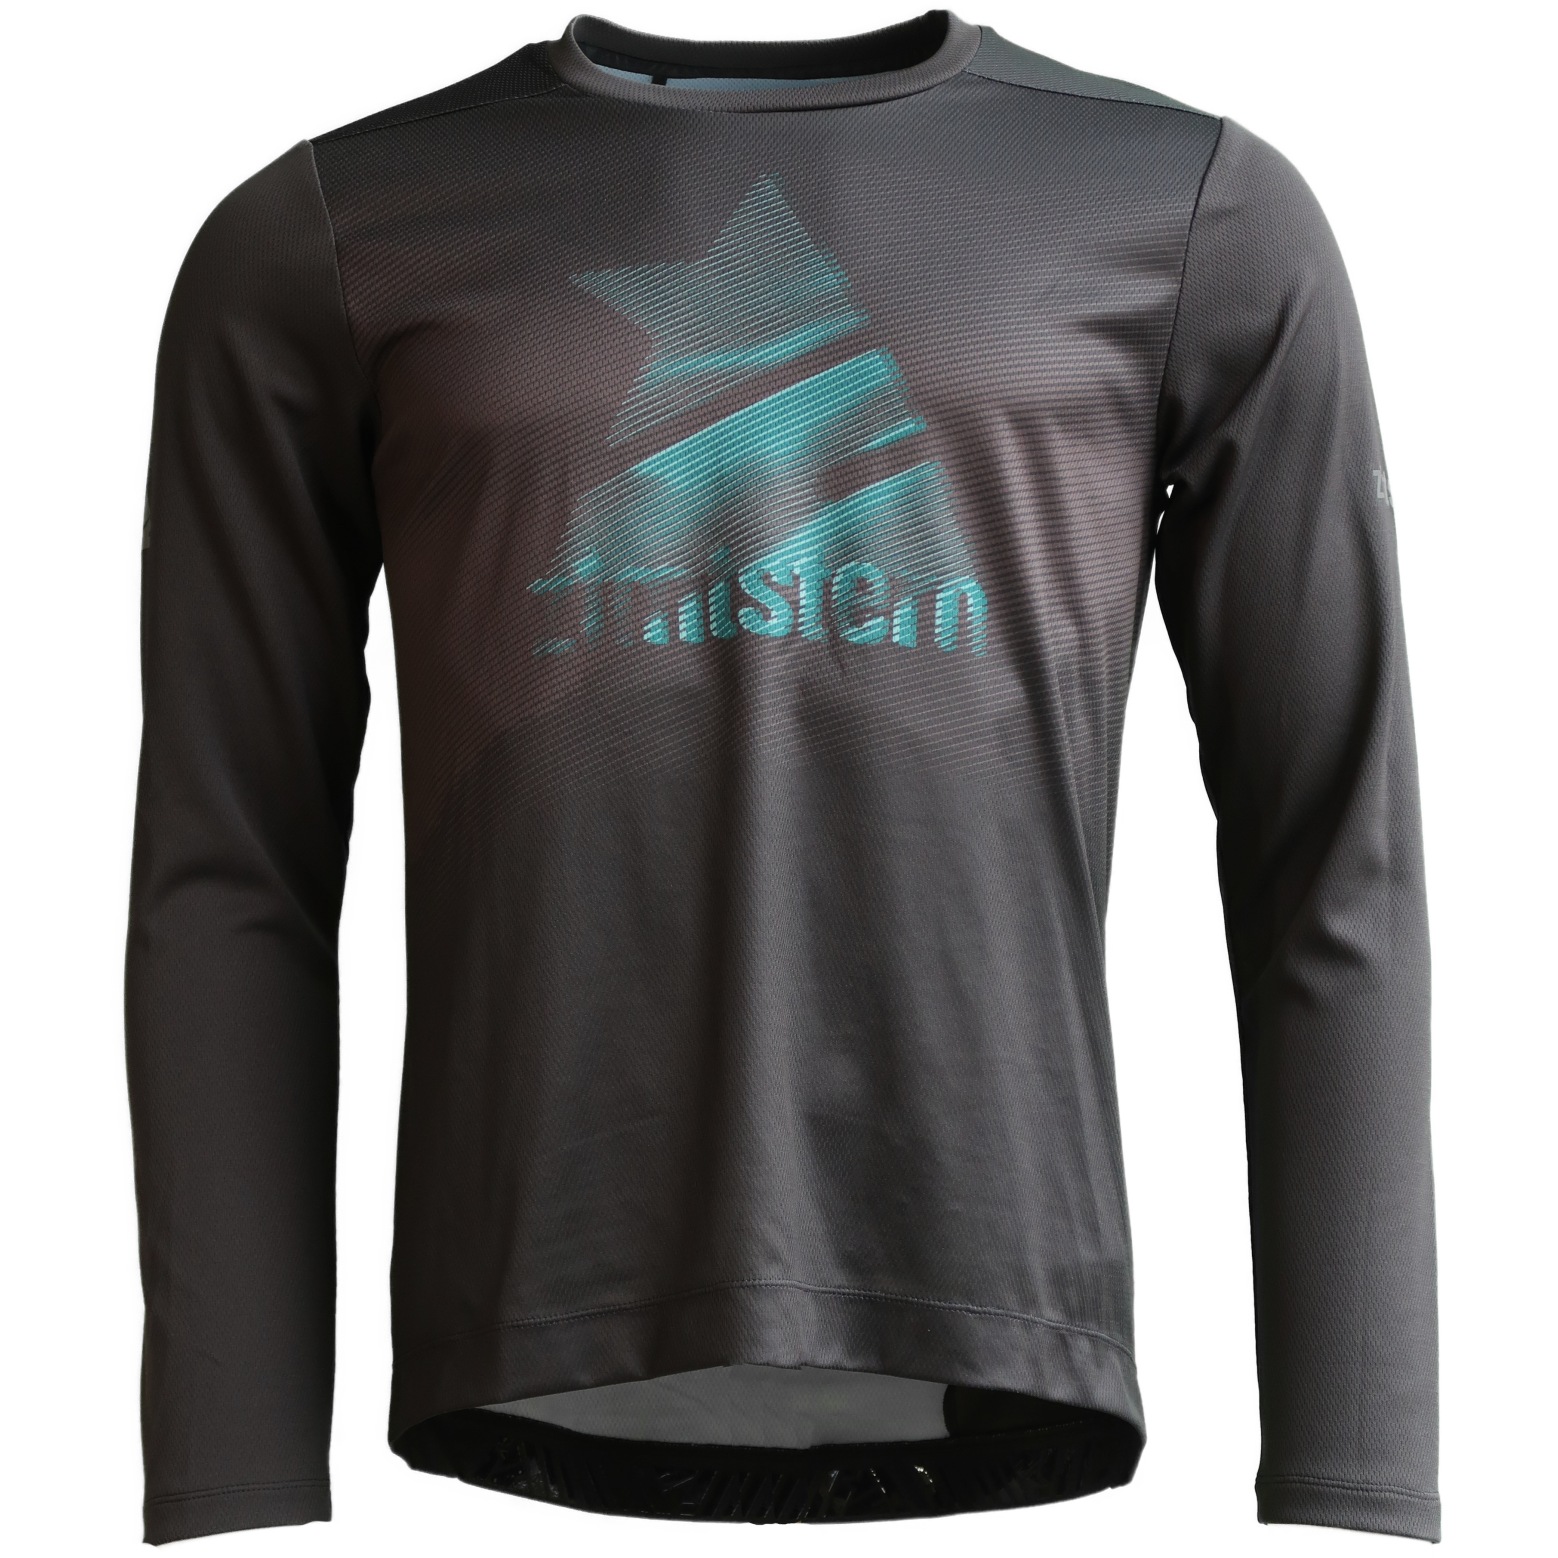 Picture of Zimtstern Iconz Long Sleeve MTB-Shirt - pirate black/pirate black